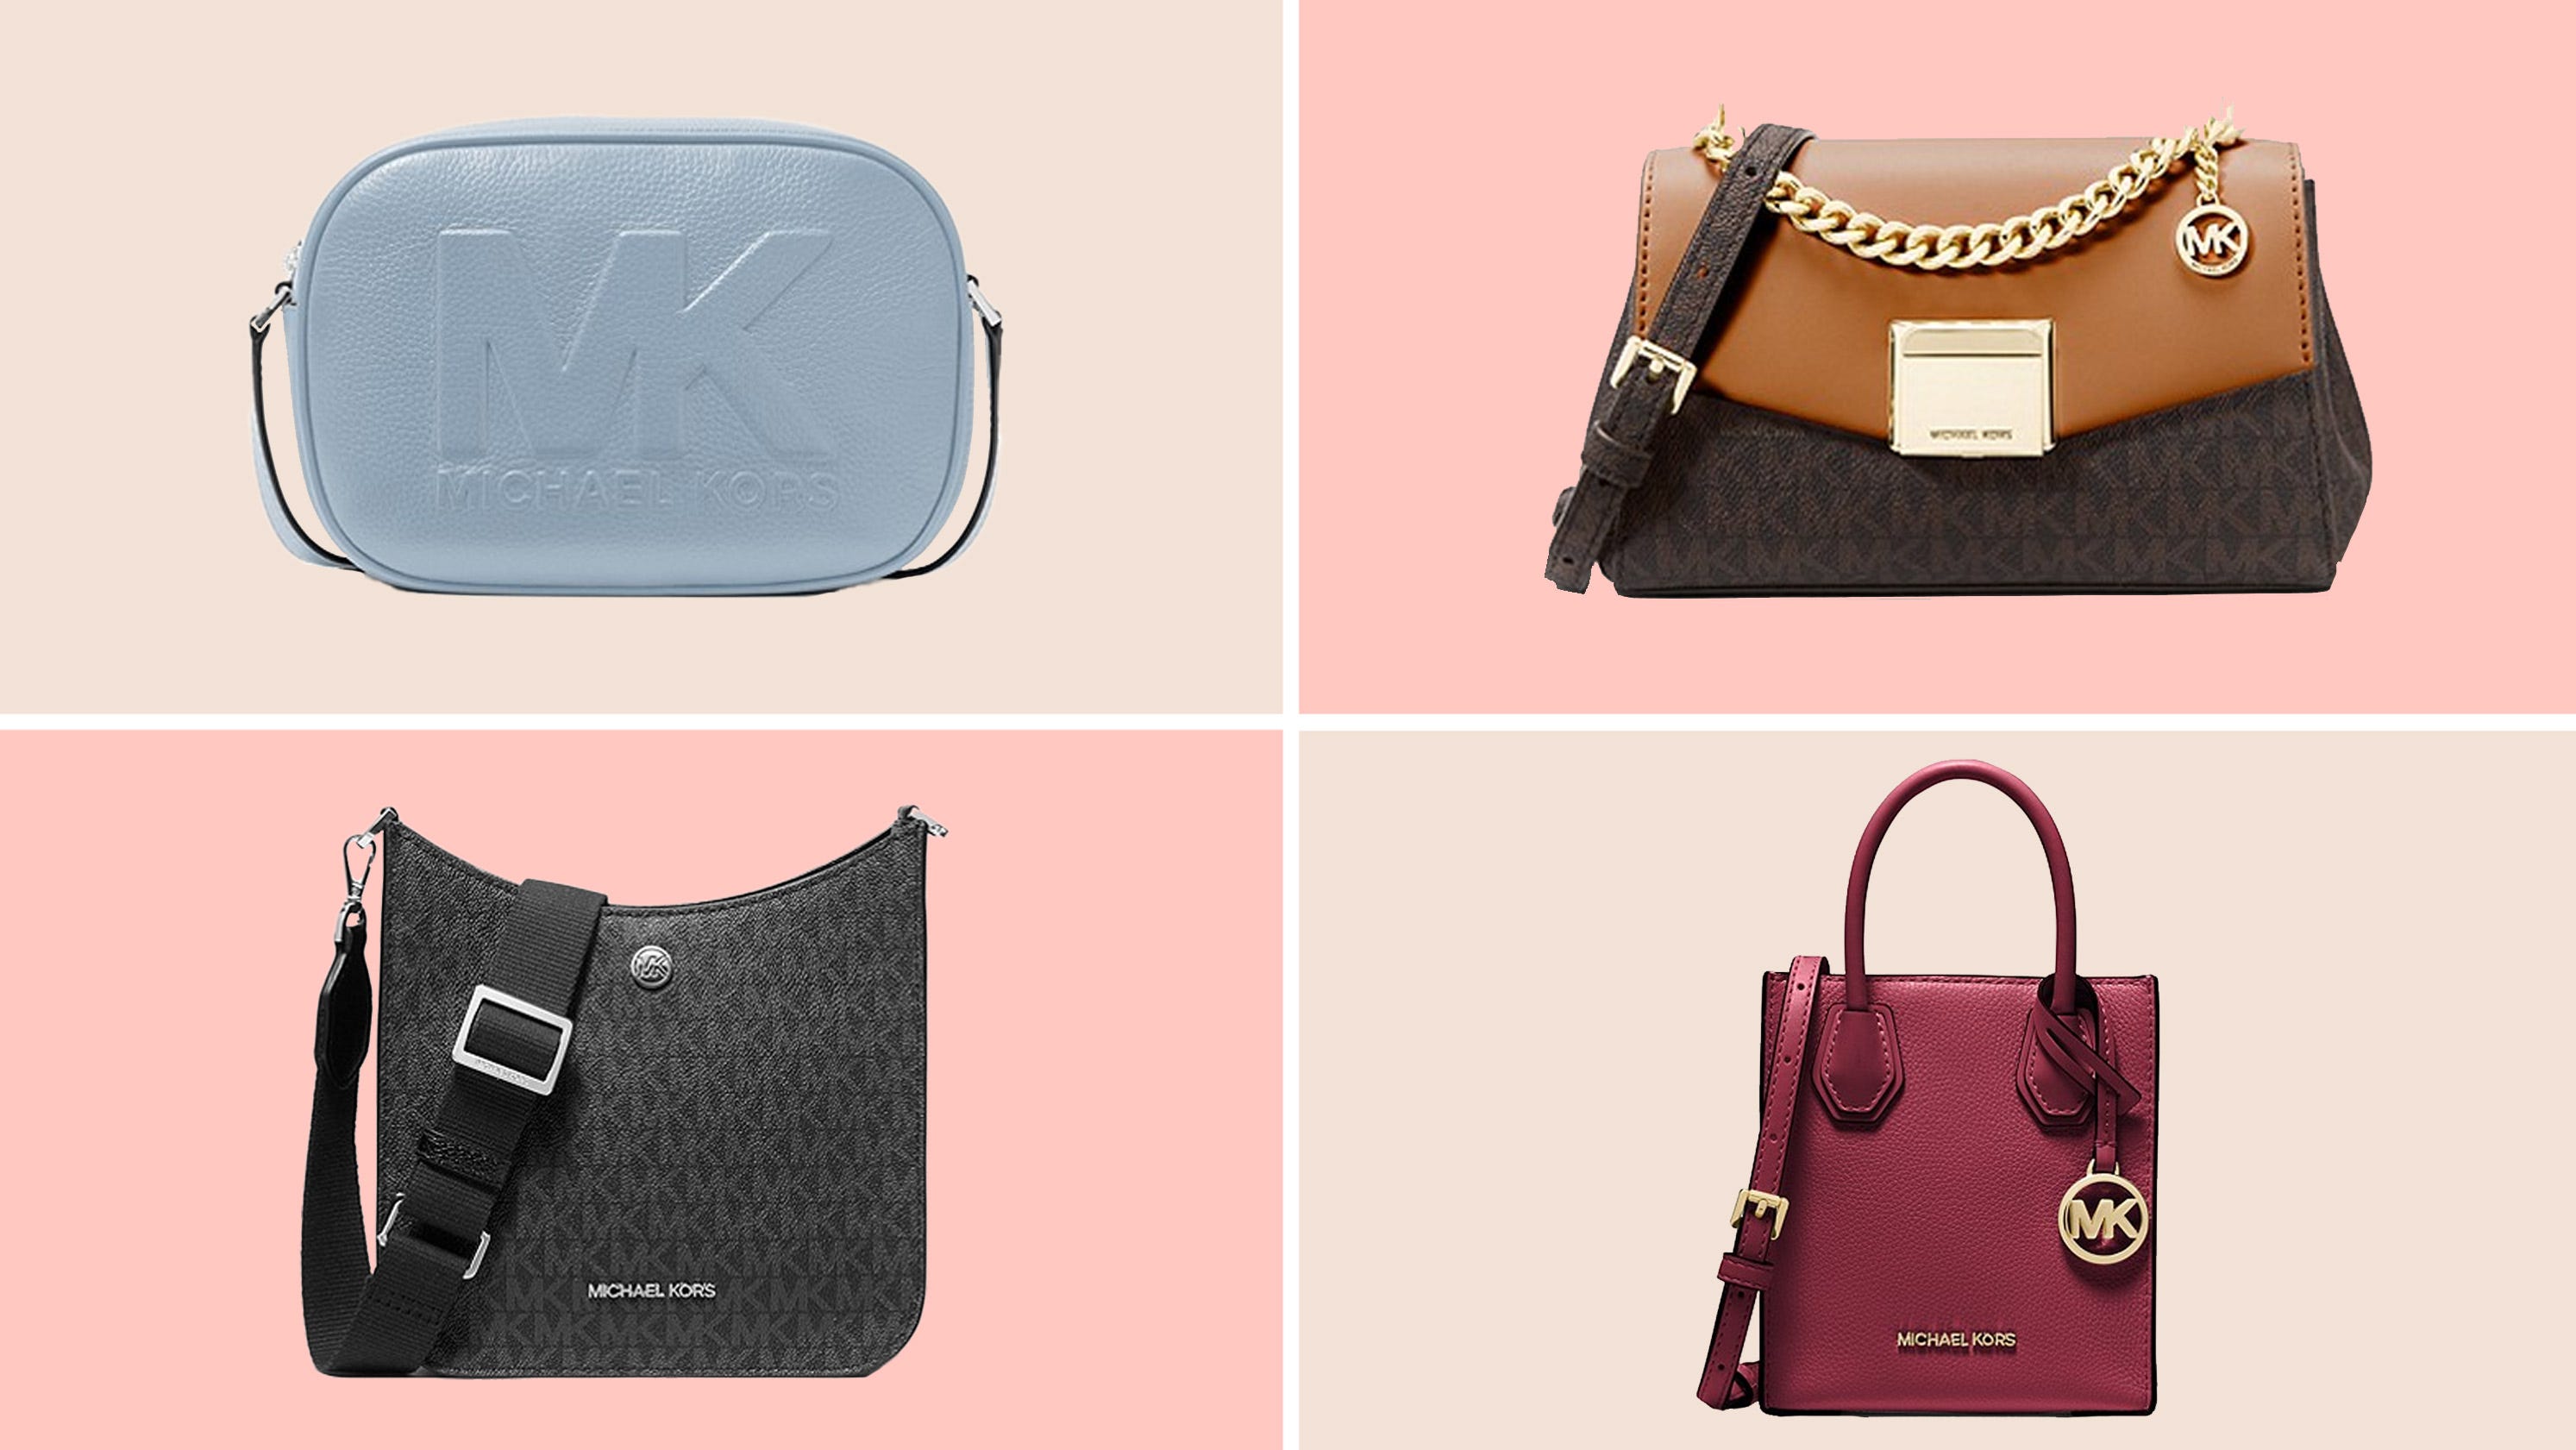 Michael Kors sale: Take an extra 25% off purses, totes and crossbodies